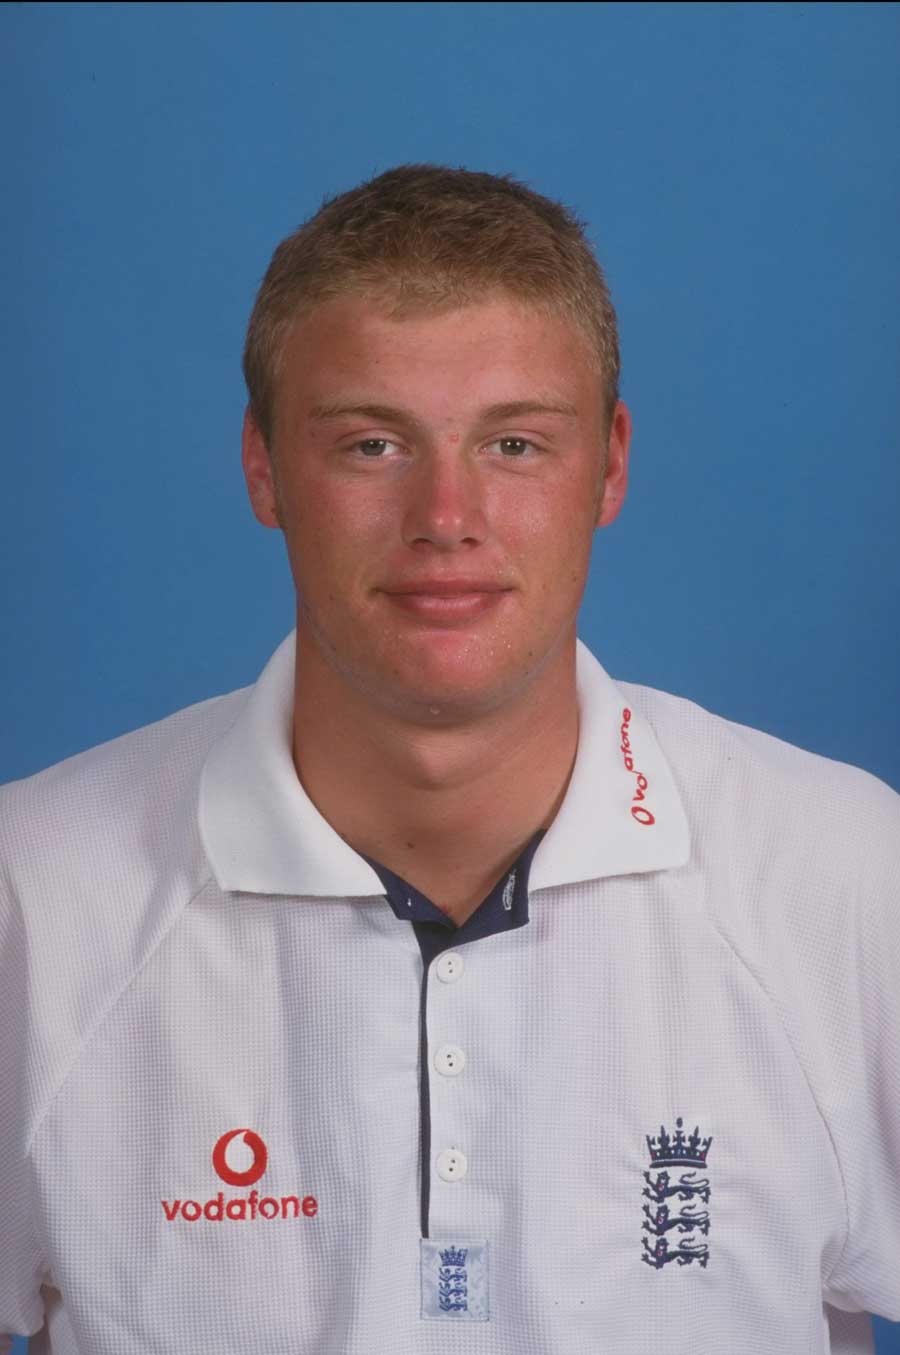 Andrew Flintoff smiles for the camera